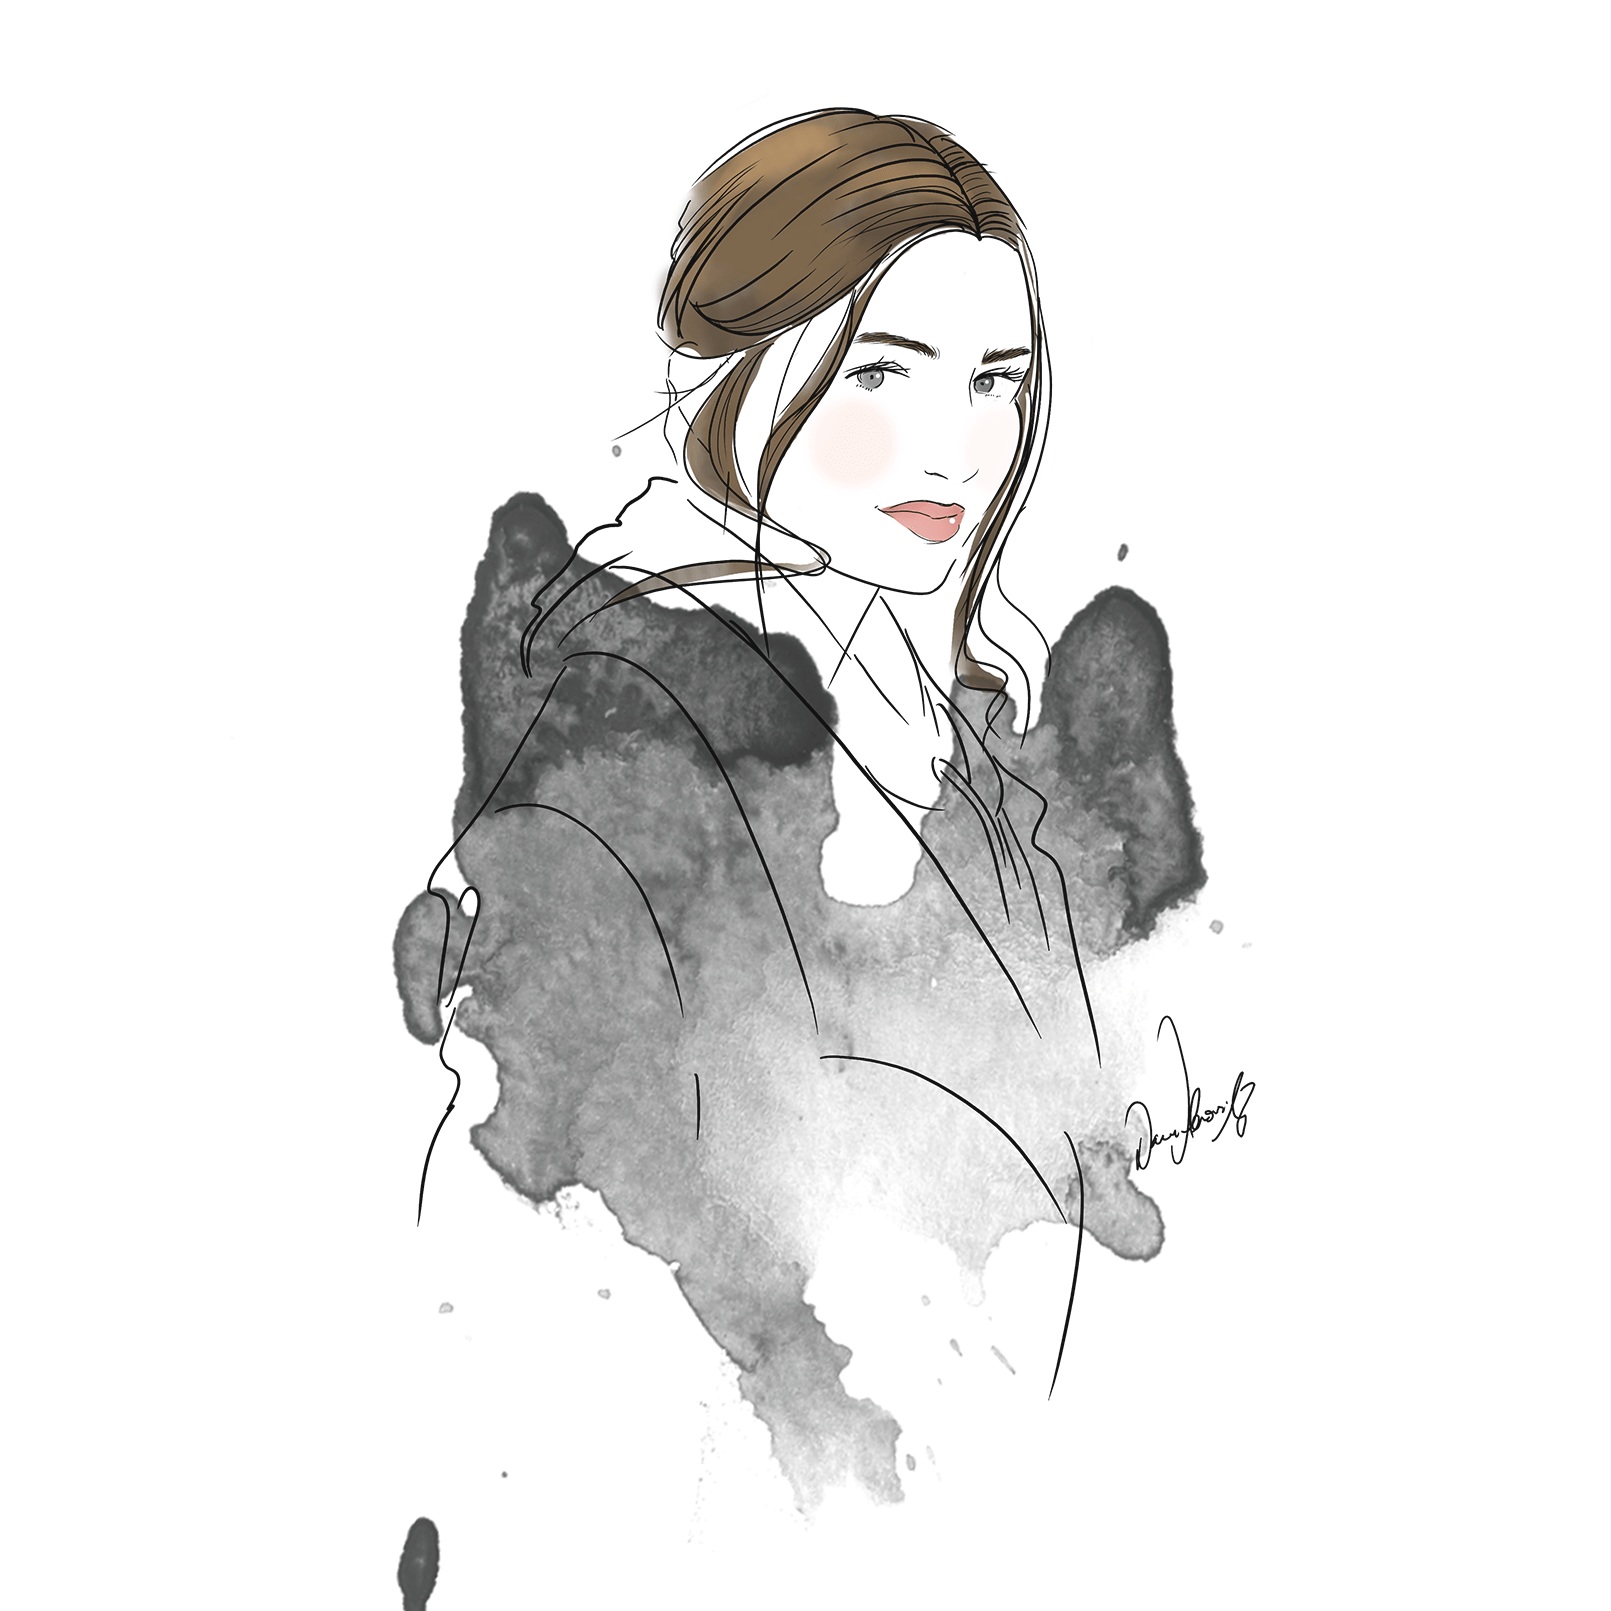 Influencer-Live Drawing at the FashionBloggerCafé WHITE EDITION during Berlin Fashion Week. // Digital //